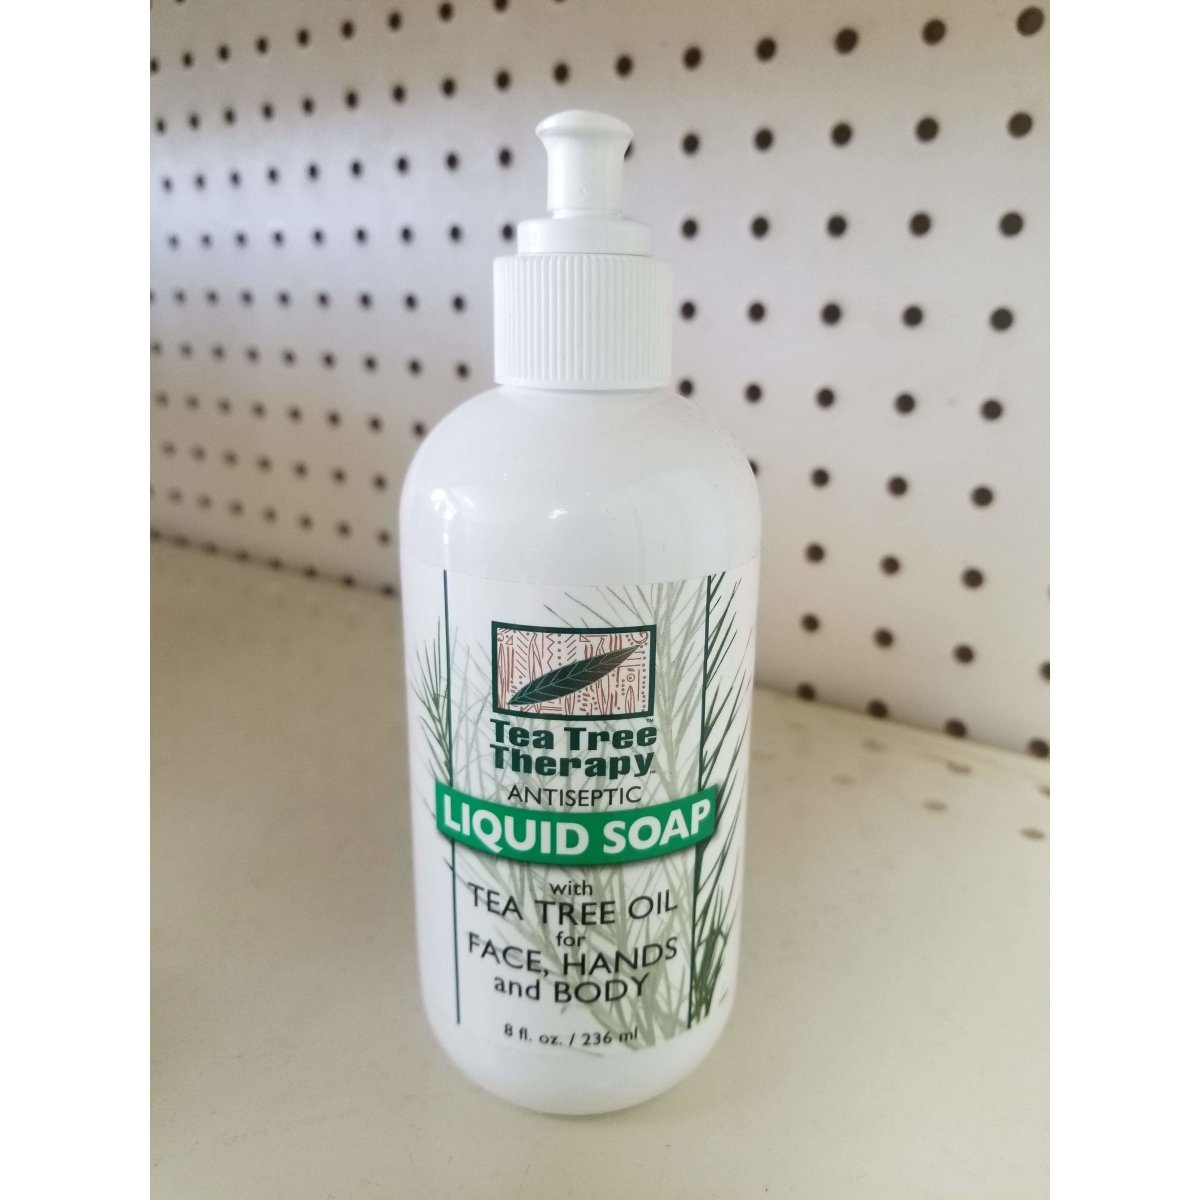 Liquid Soap with Tea Tree Oil for Face, Hands and Body 8 Oz